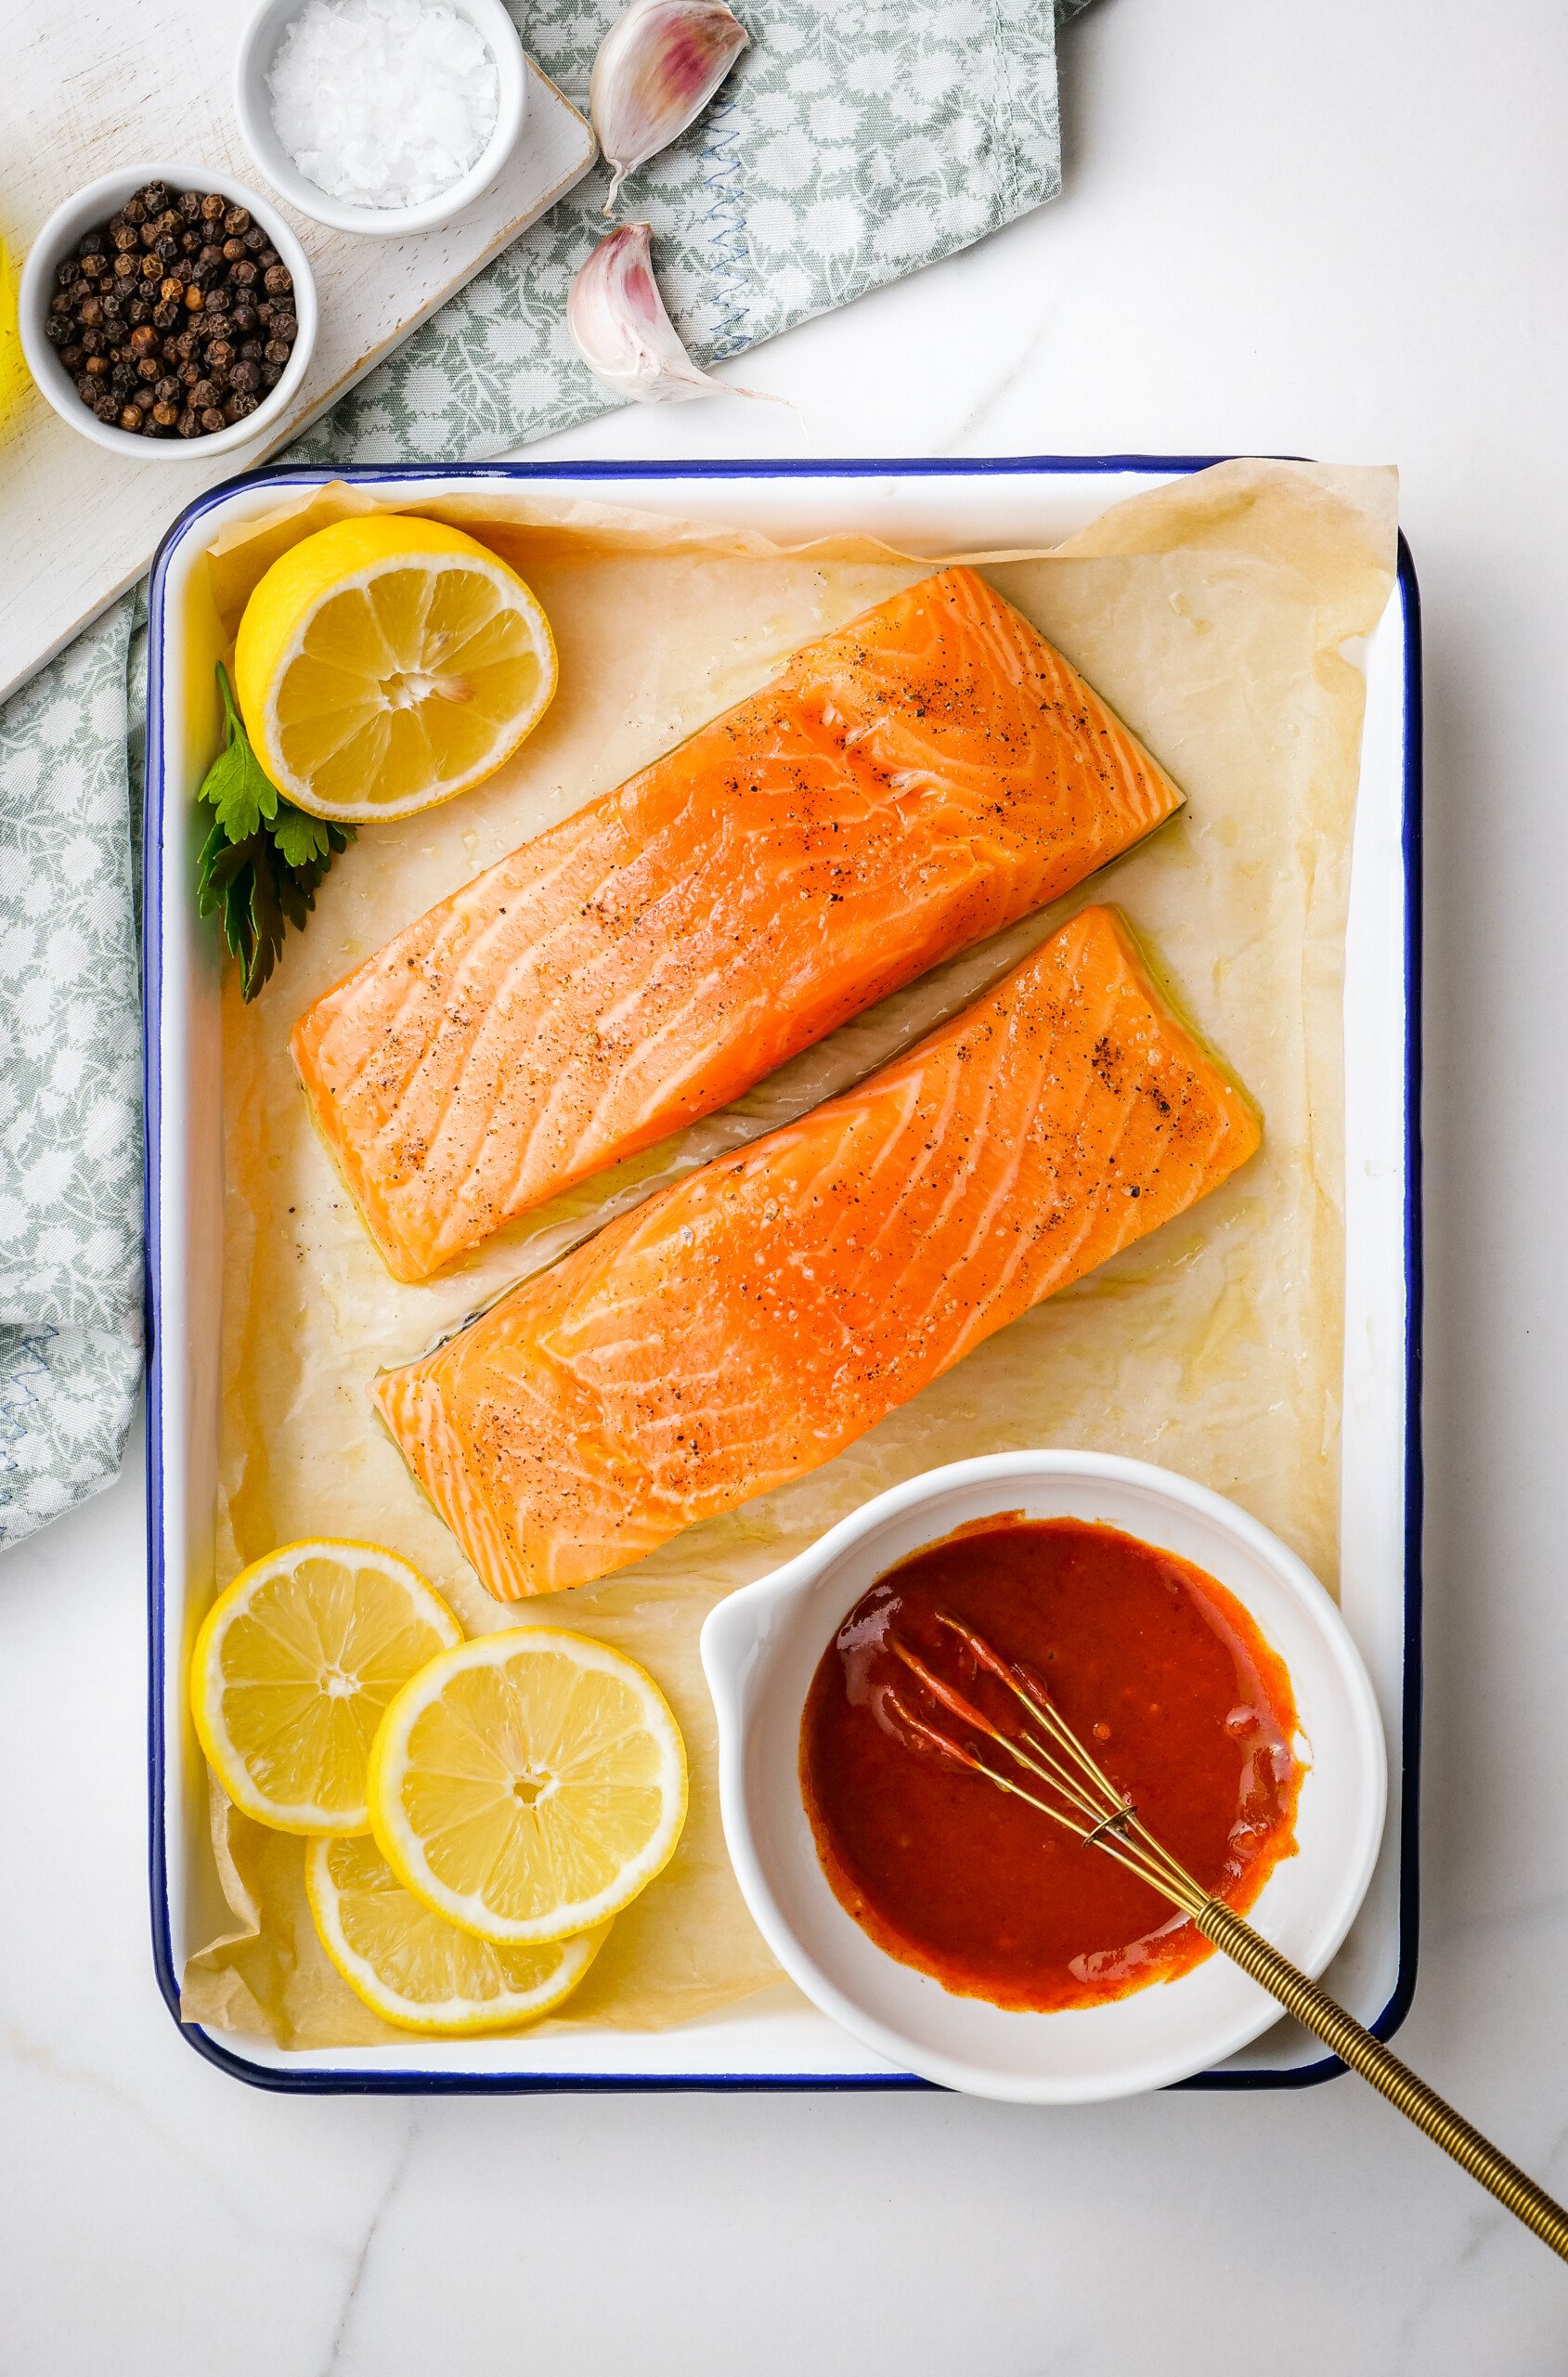 Uncooked salmon fillets o a parchment-lined baking sheet with lemon slices and a small bowl of sauce.